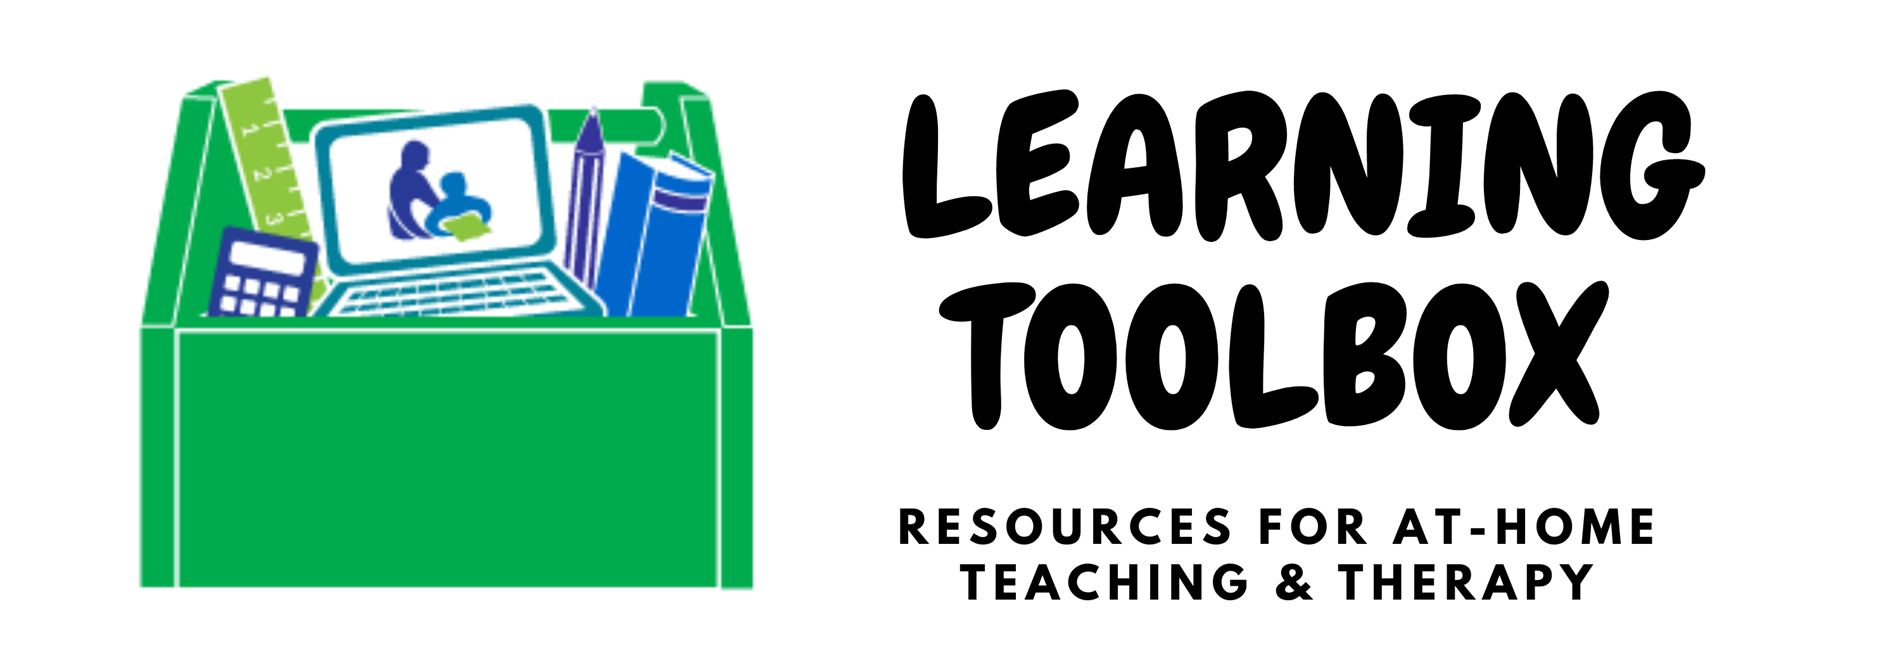 learning toolbox with computer and papers inside box and learning toolbox resources for at home teaching and therapy writing on the right side